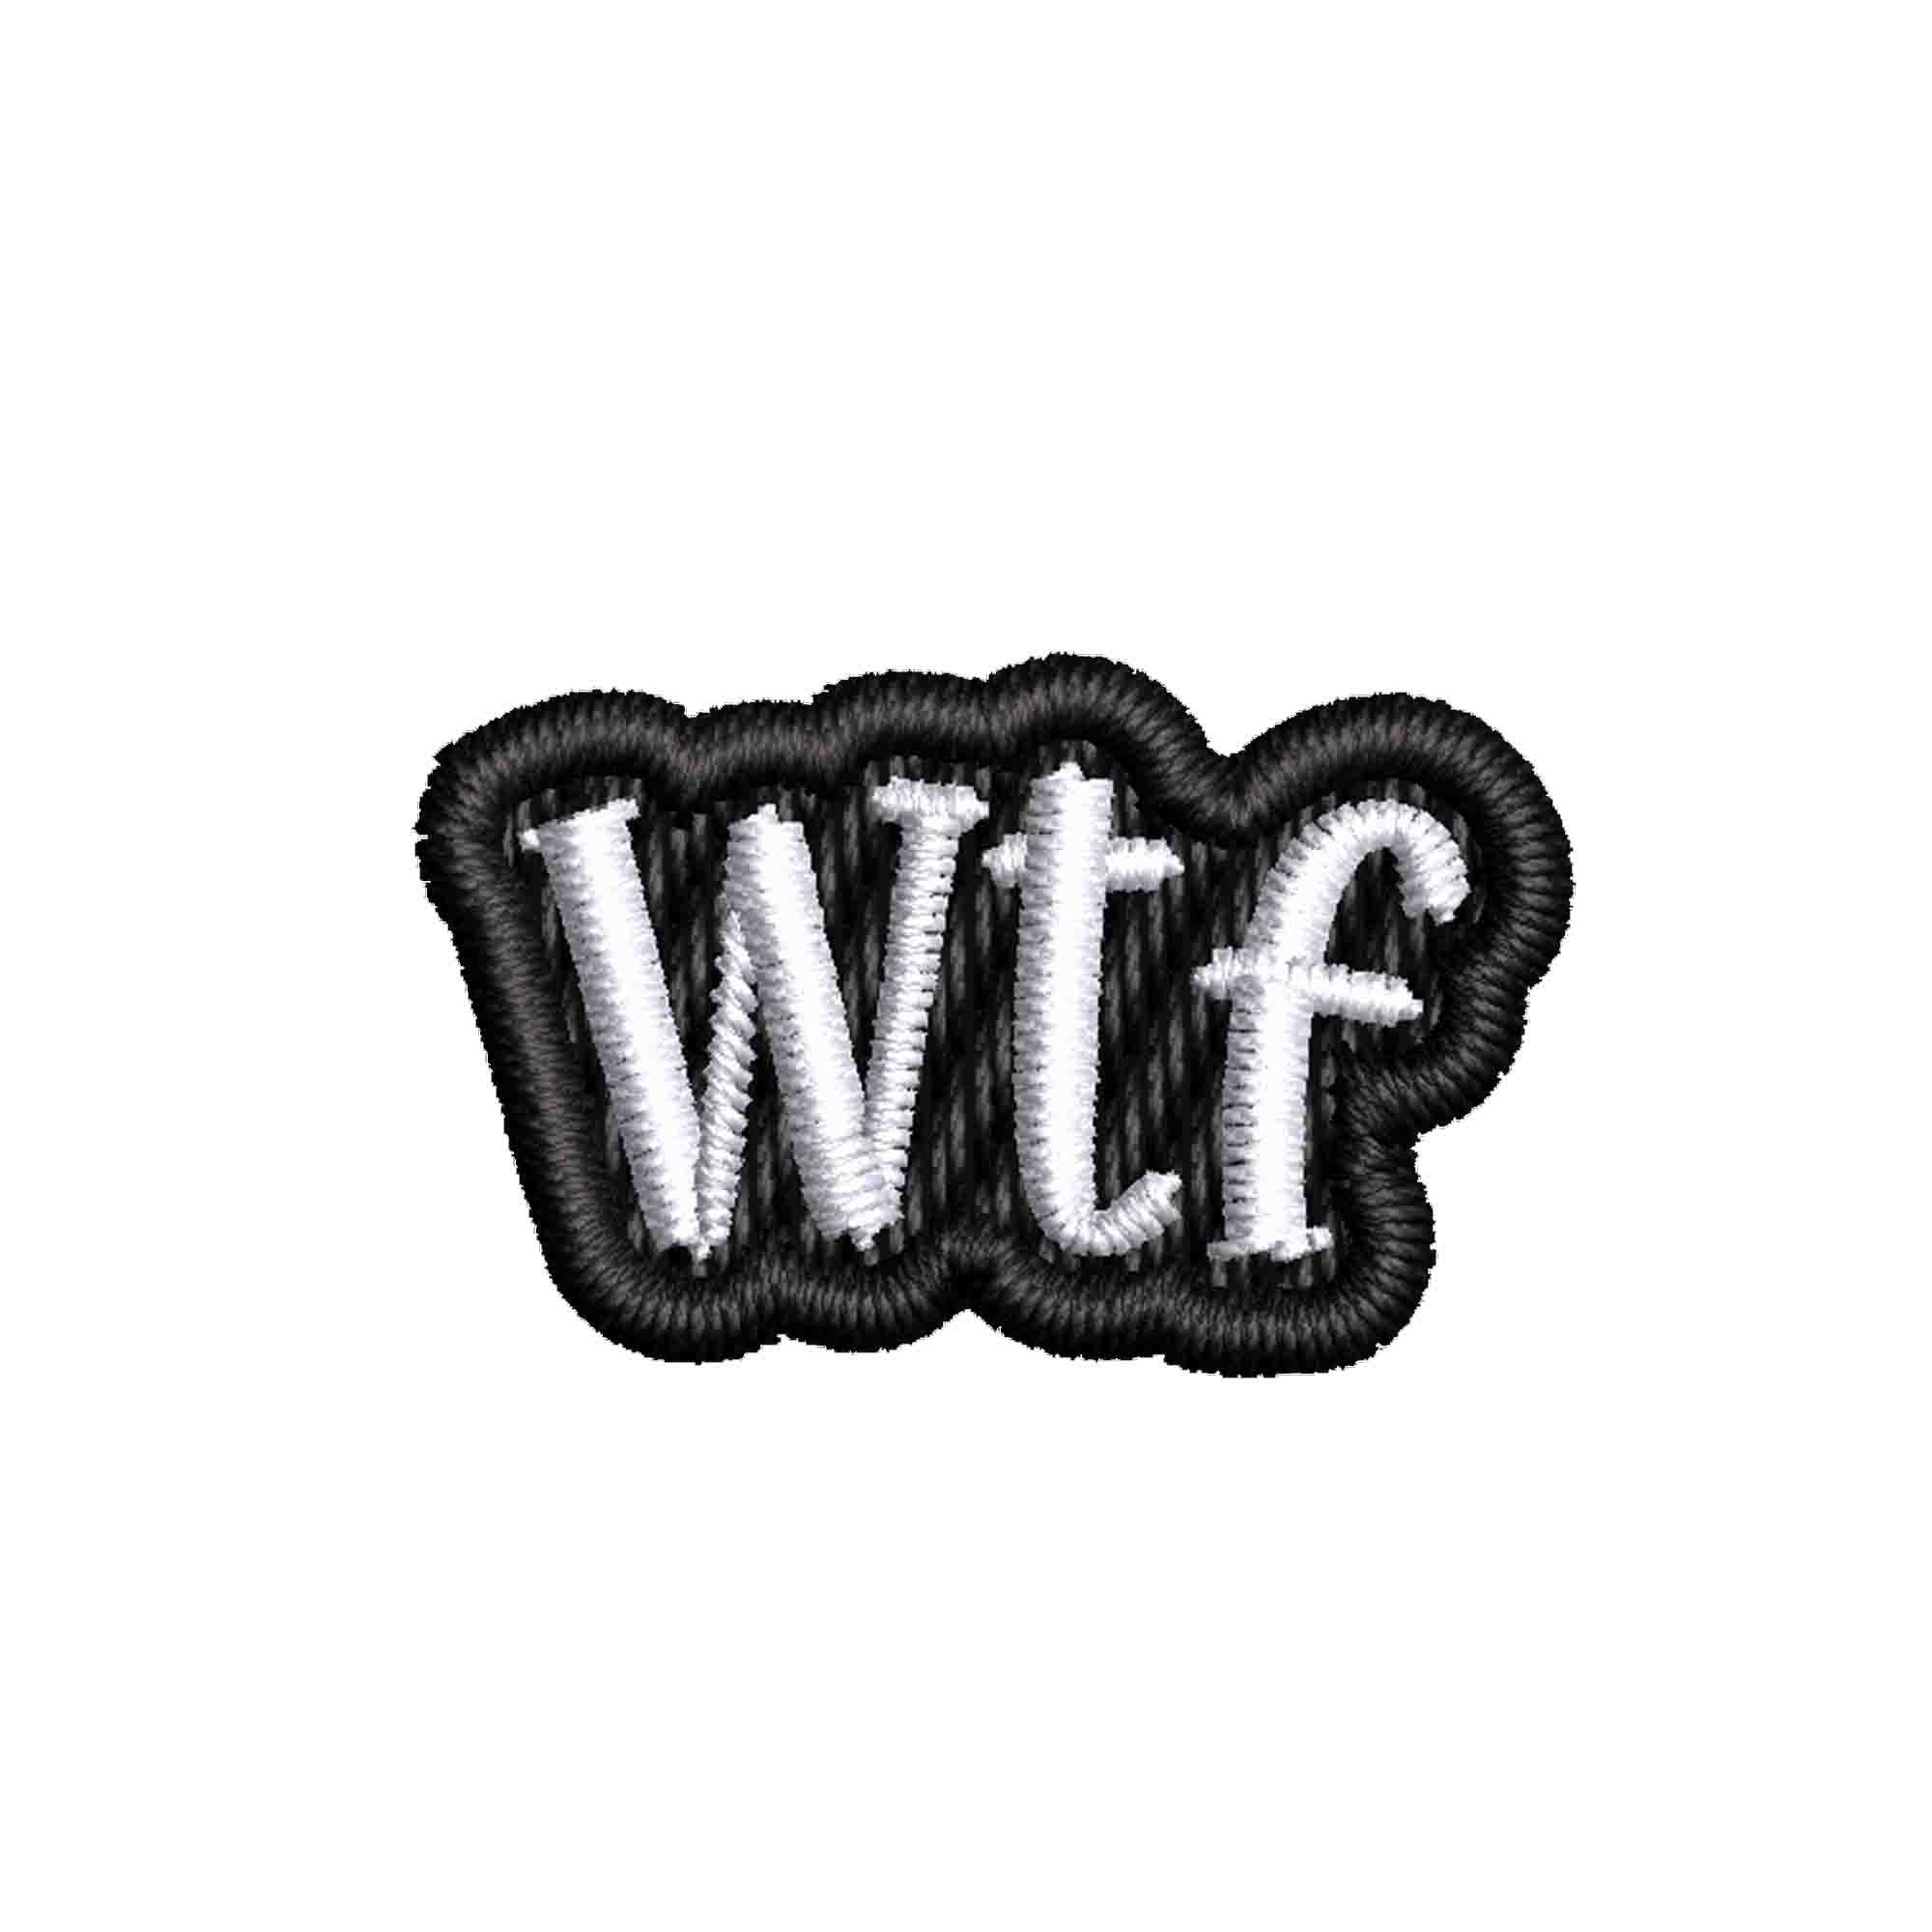 WTF Funny Joke Letters Embroidery Patch For Clothing, Hats, And Bags Iron  On Decoration Sewing Machine Needle Inserter From Jonnaean, $8.55